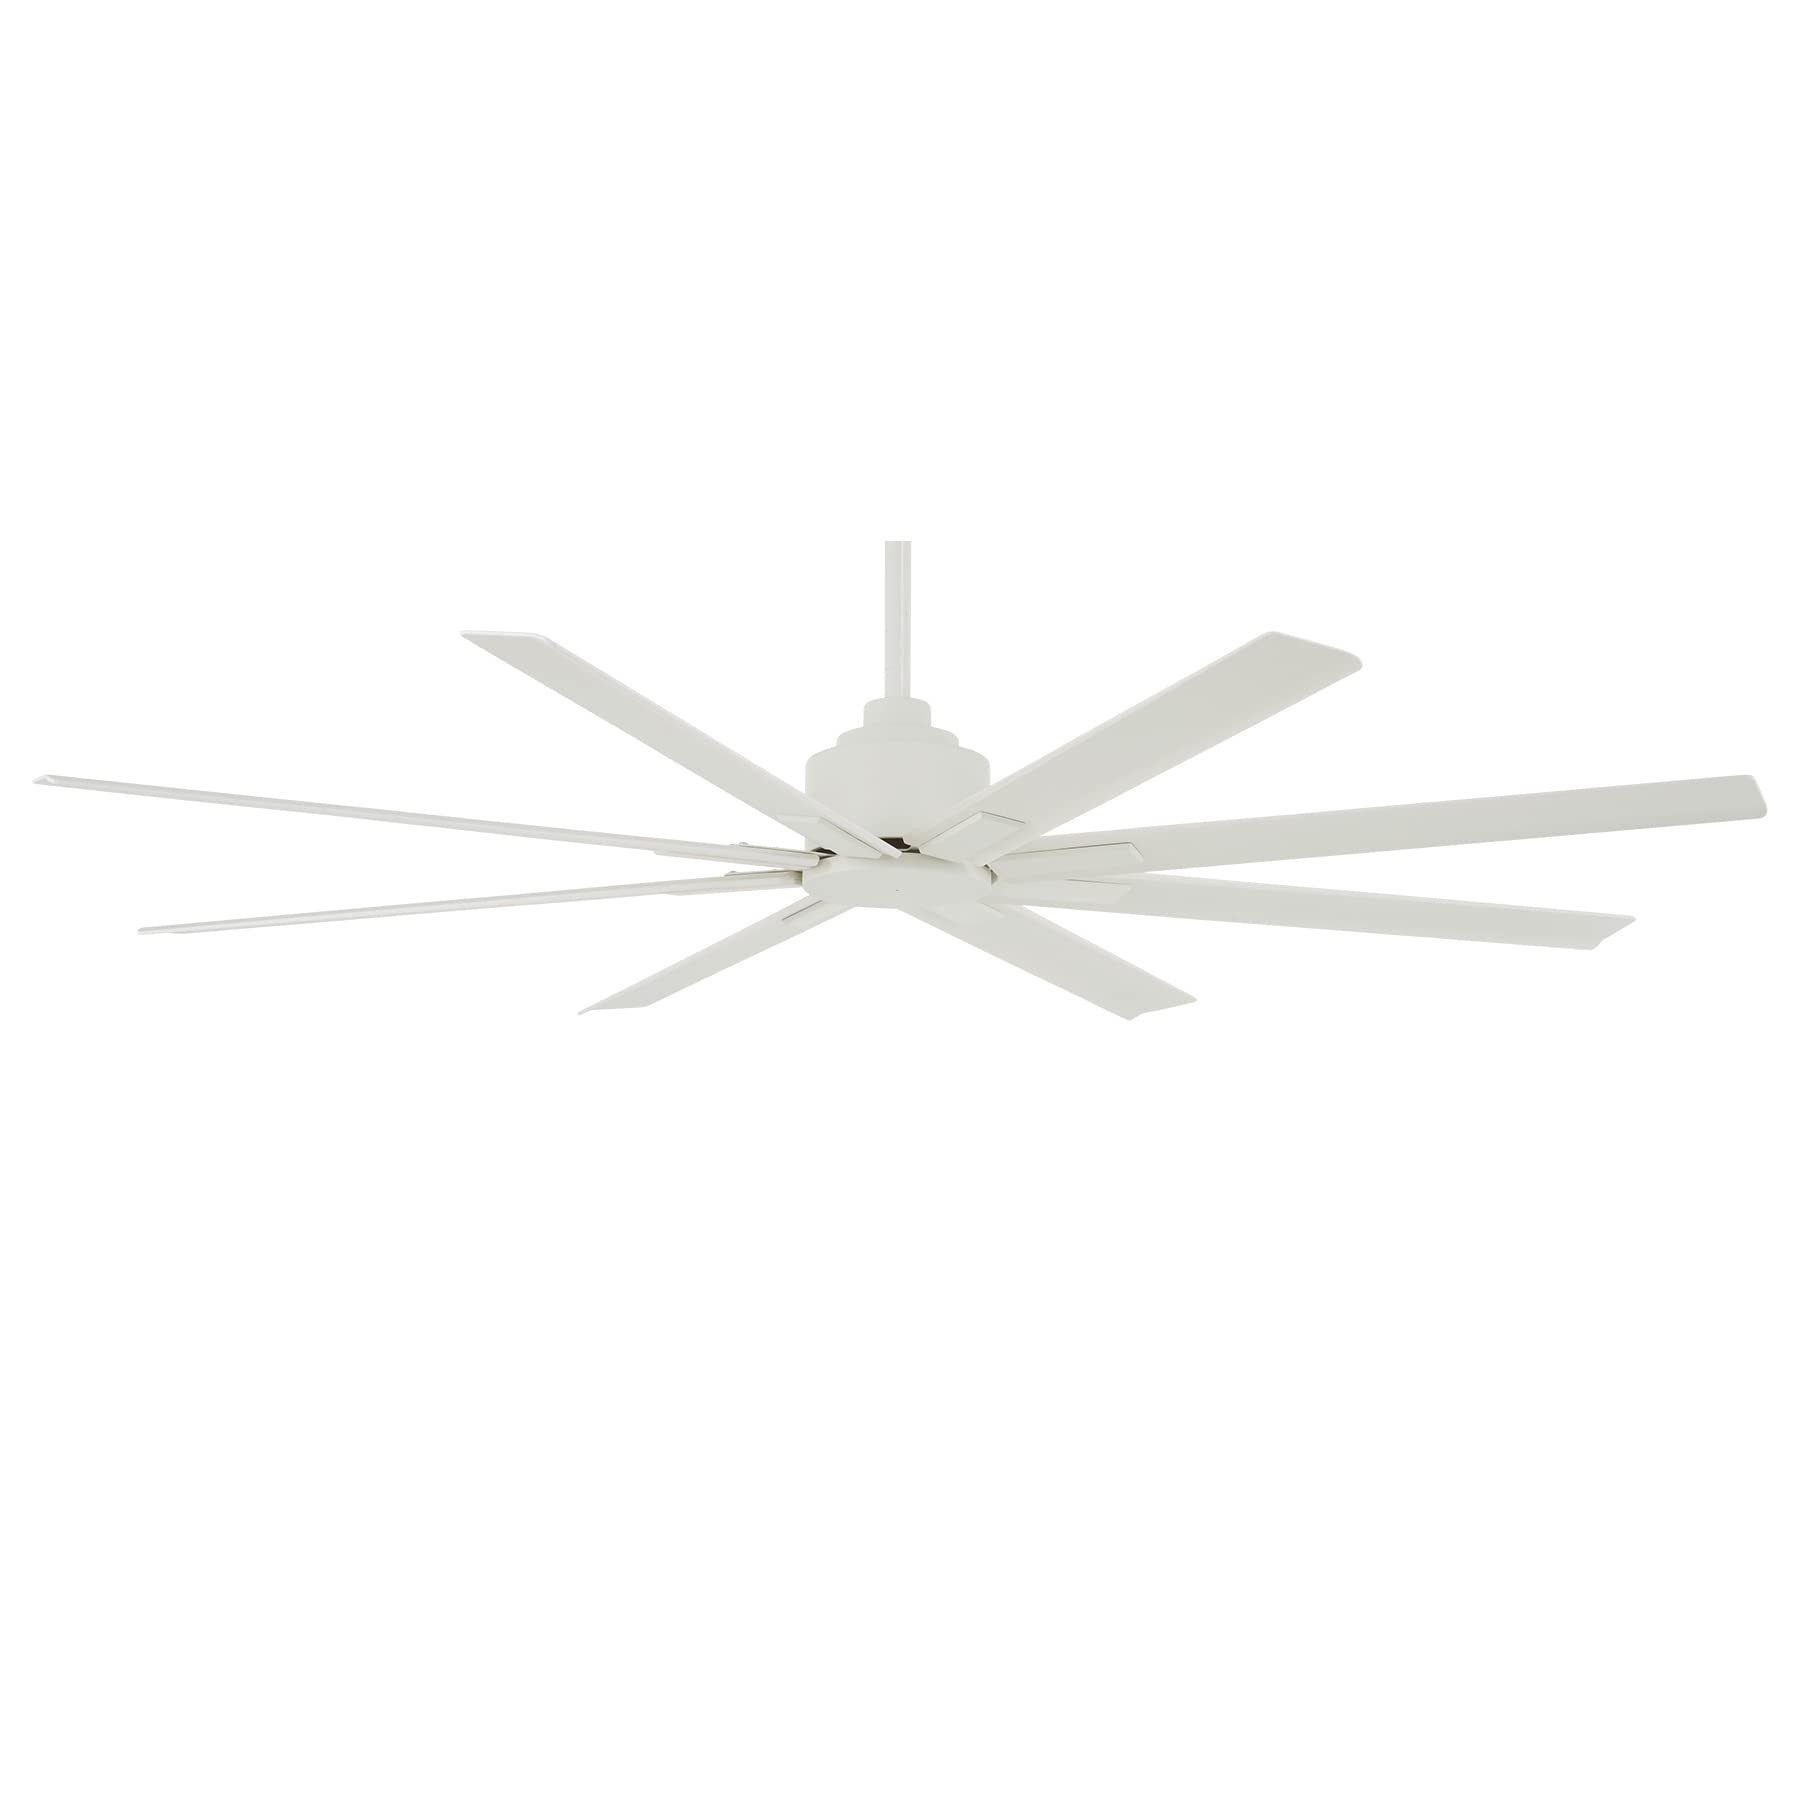 MINKA-AIRE F896-65-WHF Xtreme H2O 65 Inch Outdoor Ceiling Fan with DC Motor in Flat White Finish